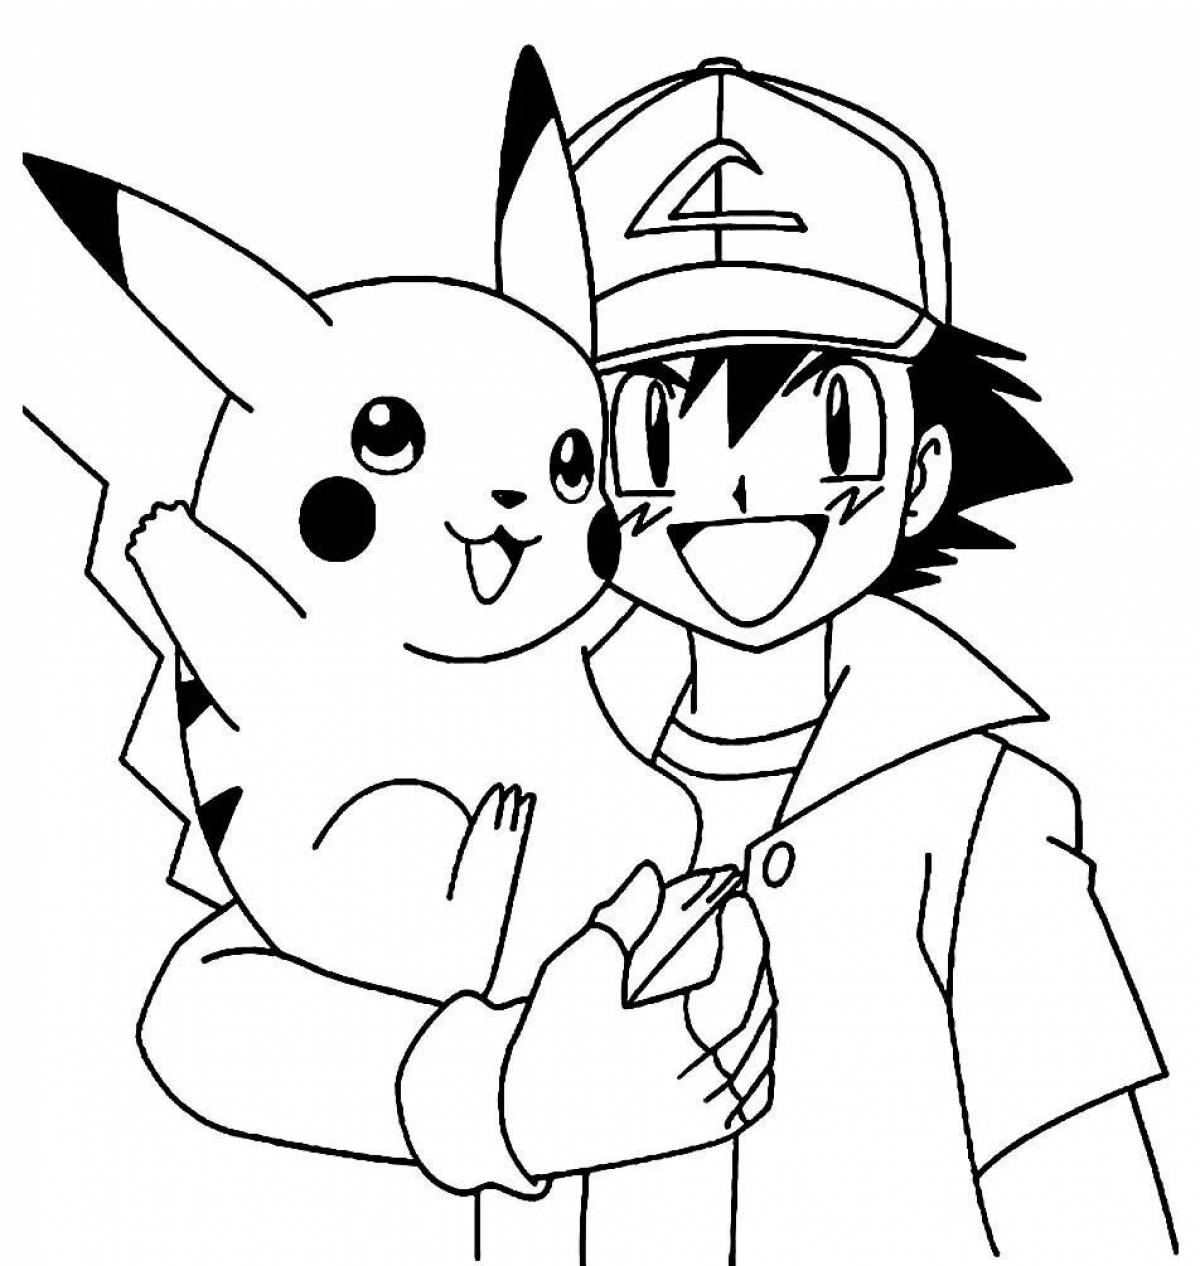 Exciting pikachu coloring book